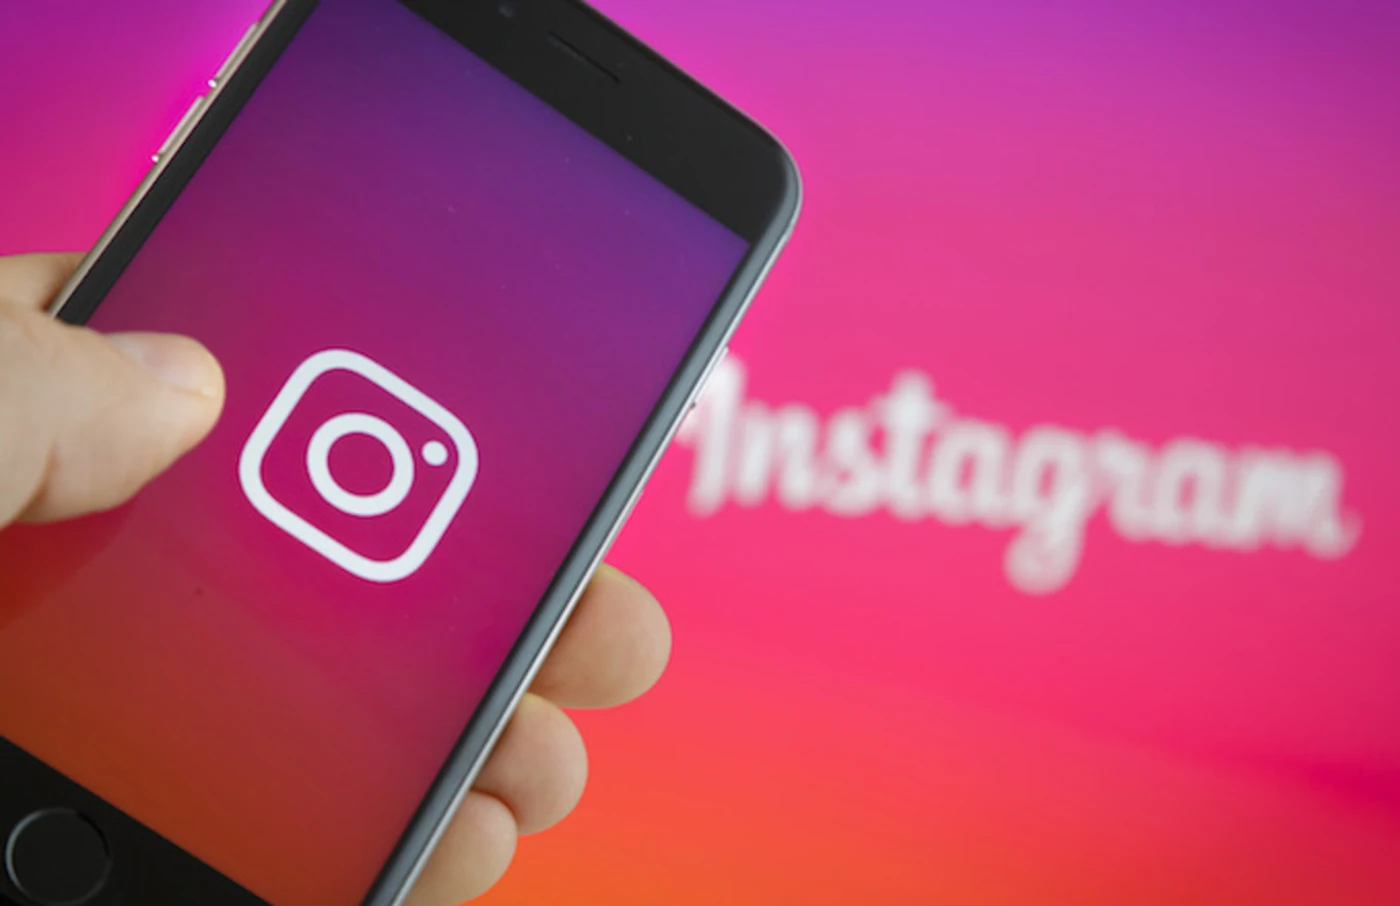 Add Post to Your Story Instagram Missing – How to Fix